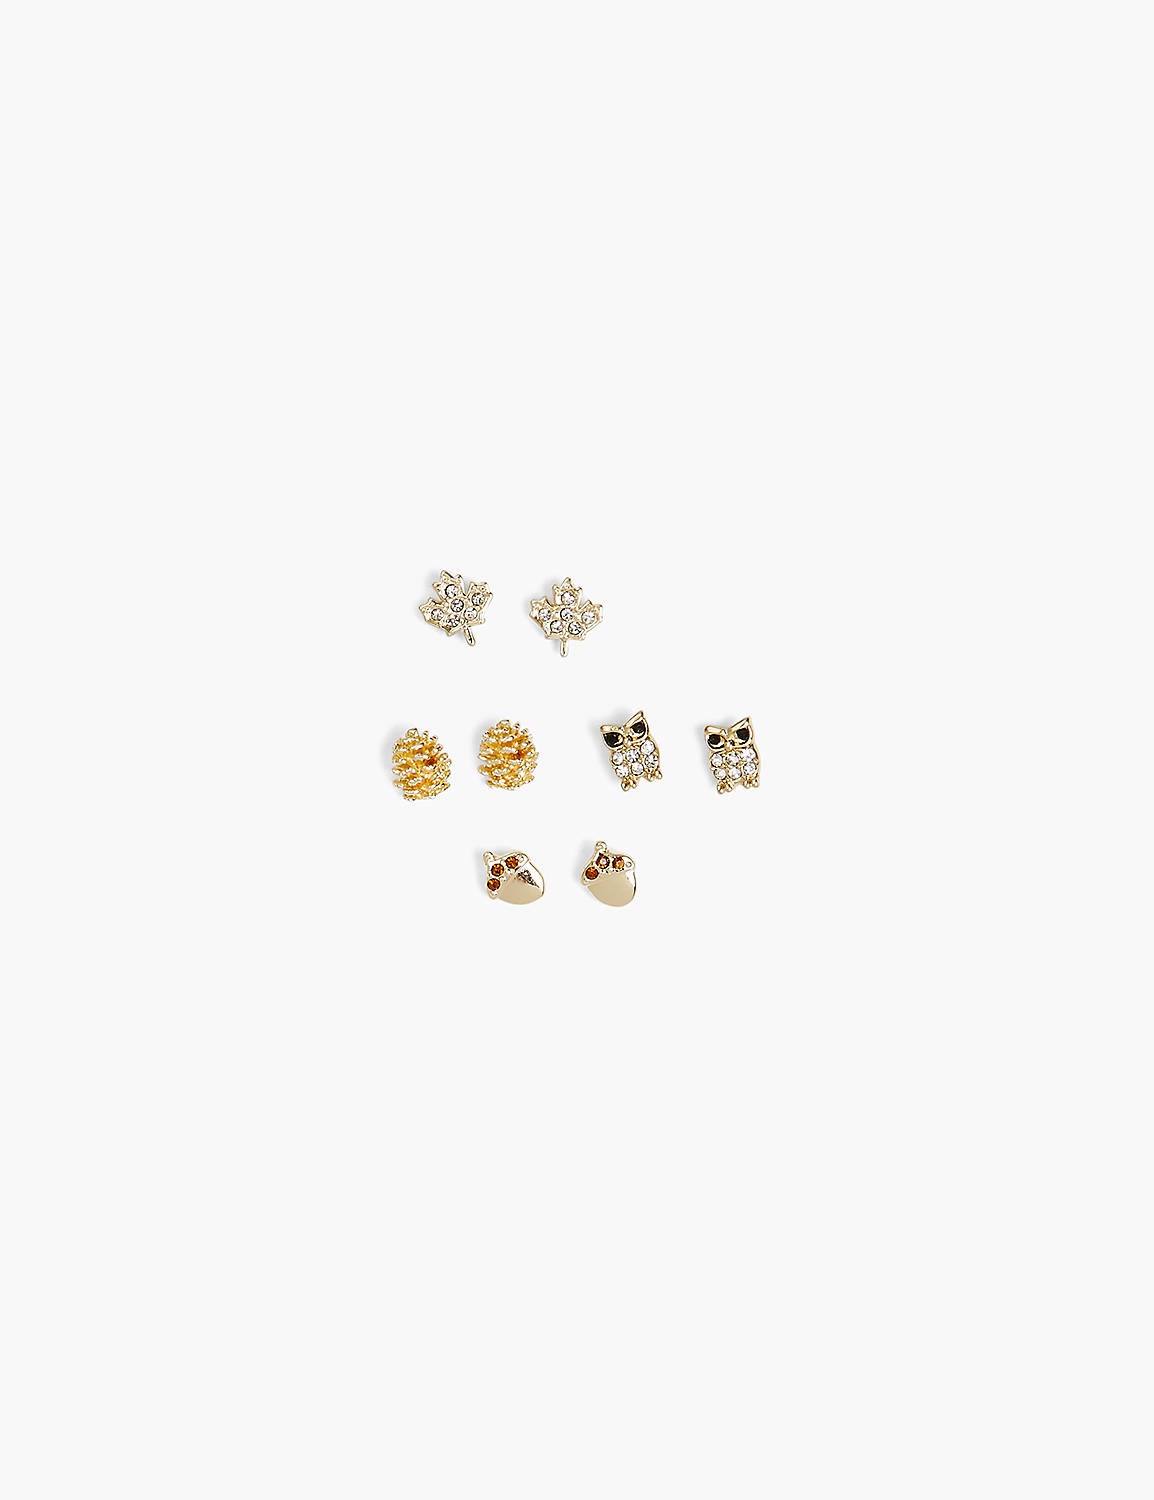 Pave Fall Earrings 4 Pack Product Image 1